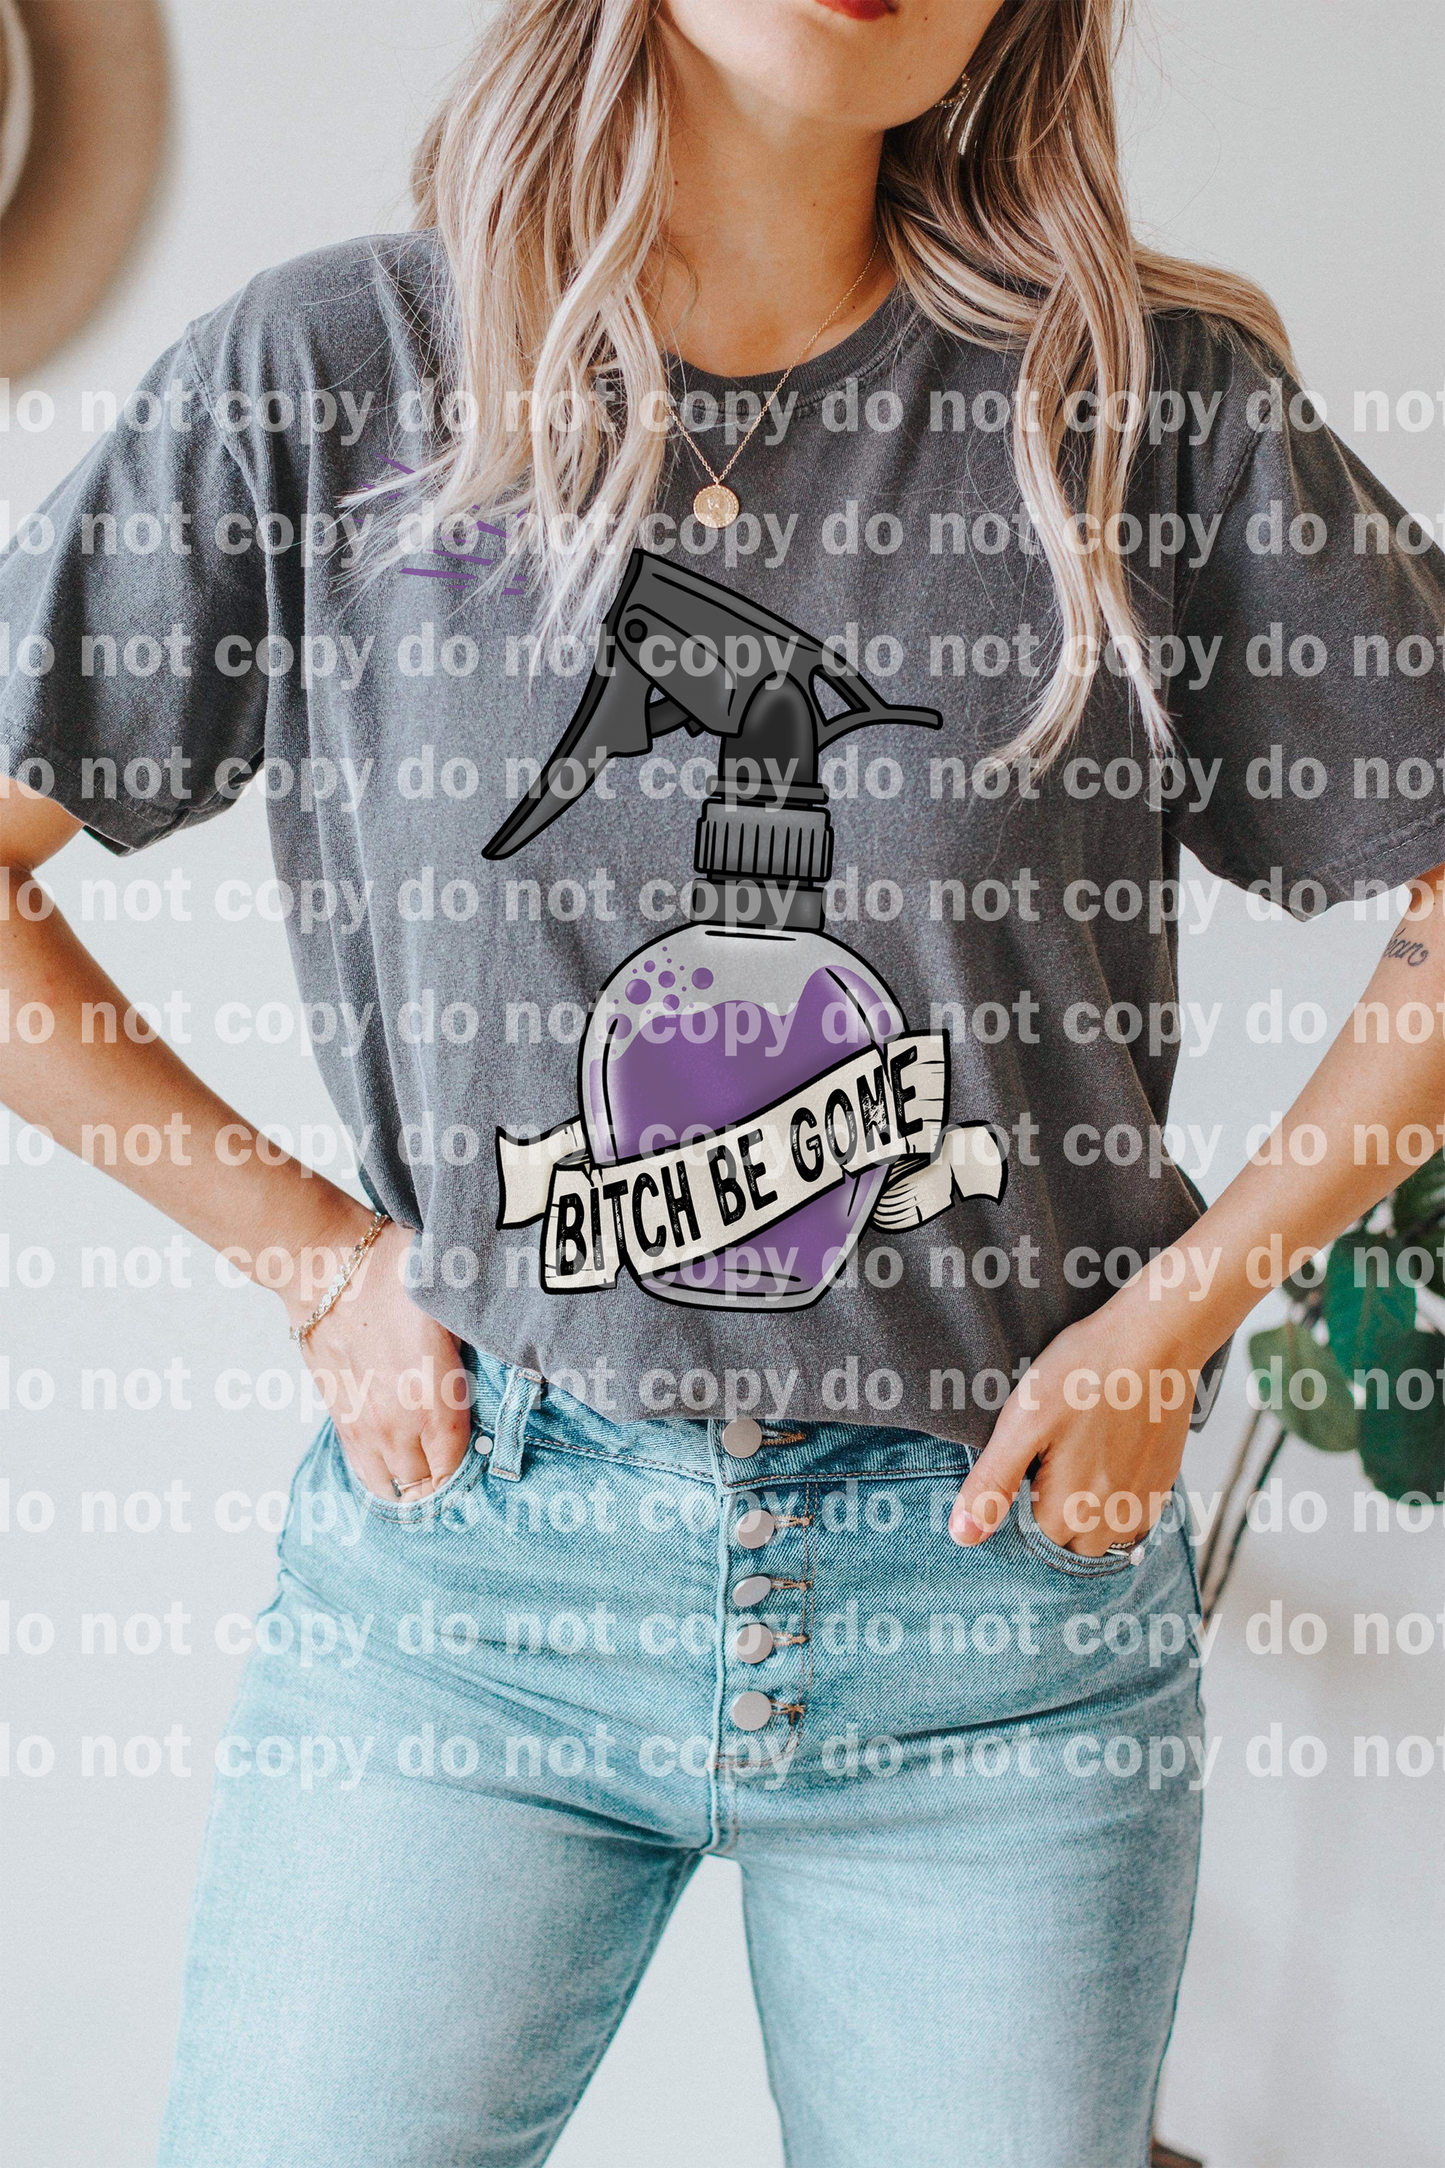 Bitch Be Gone In Various Colors Dream Print or Sublimation Print